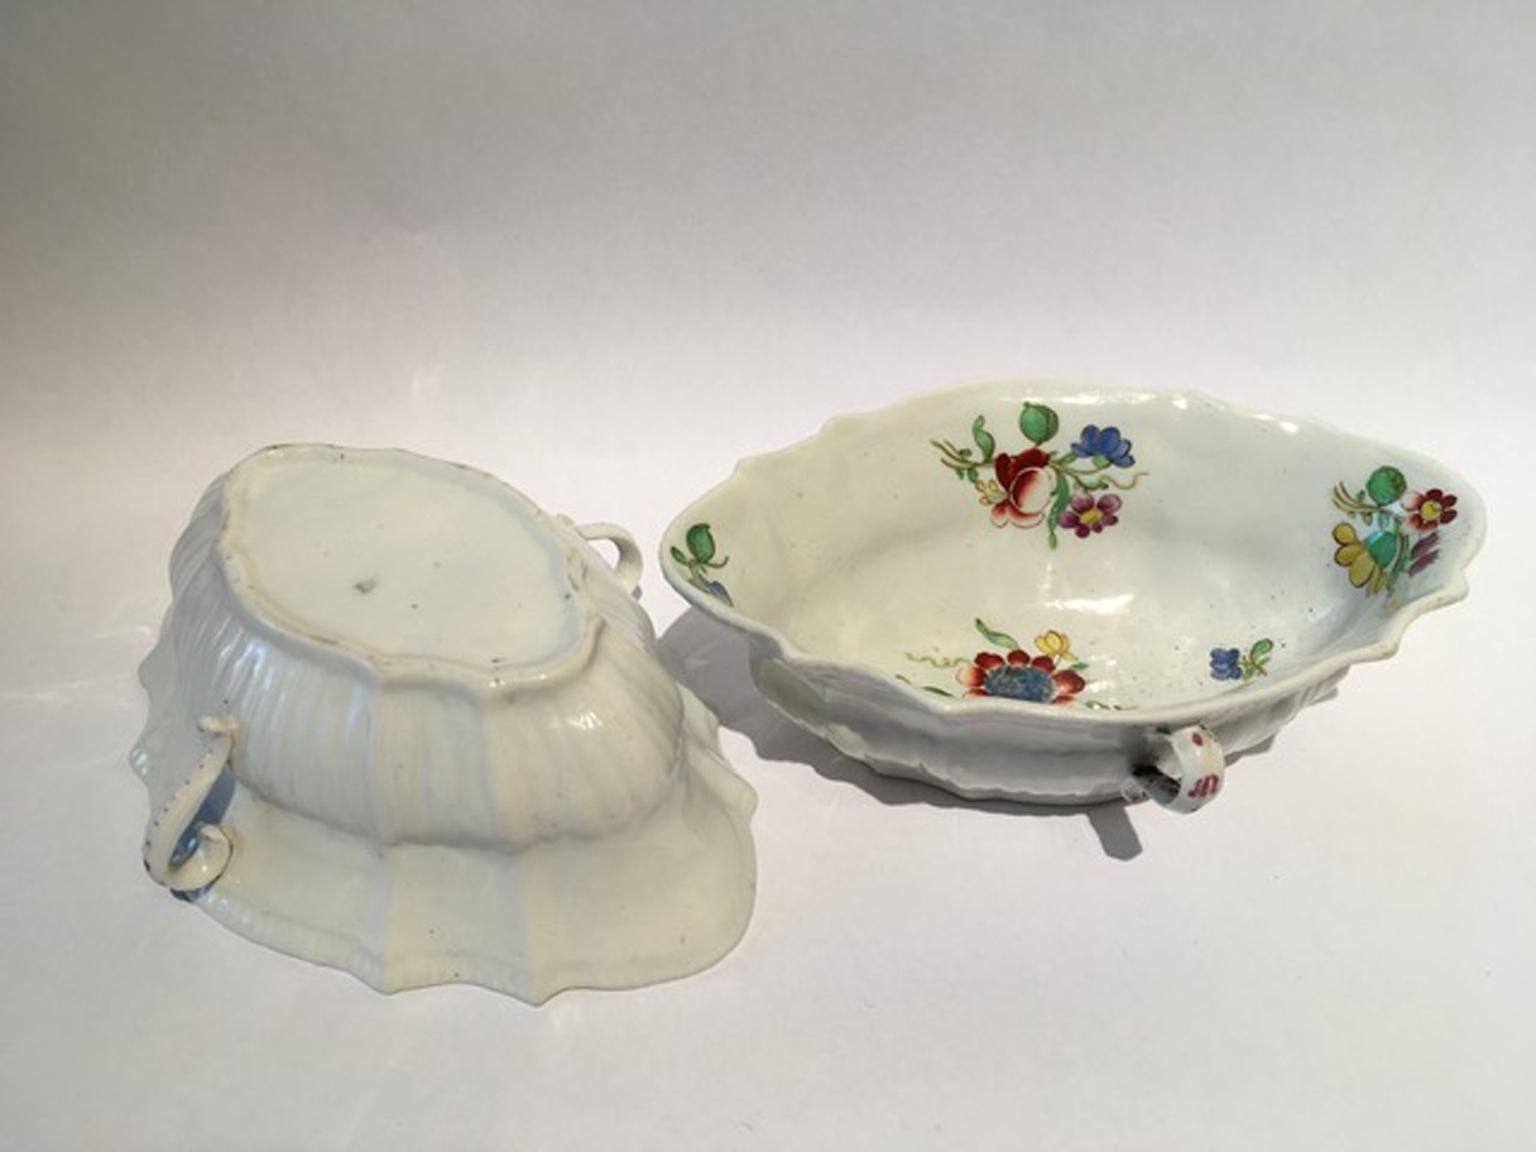 Hand-Crafted Italy 18th Century Italy Richard Ginori Doccia Pair of Porcelain Sauce Bowls For Sale